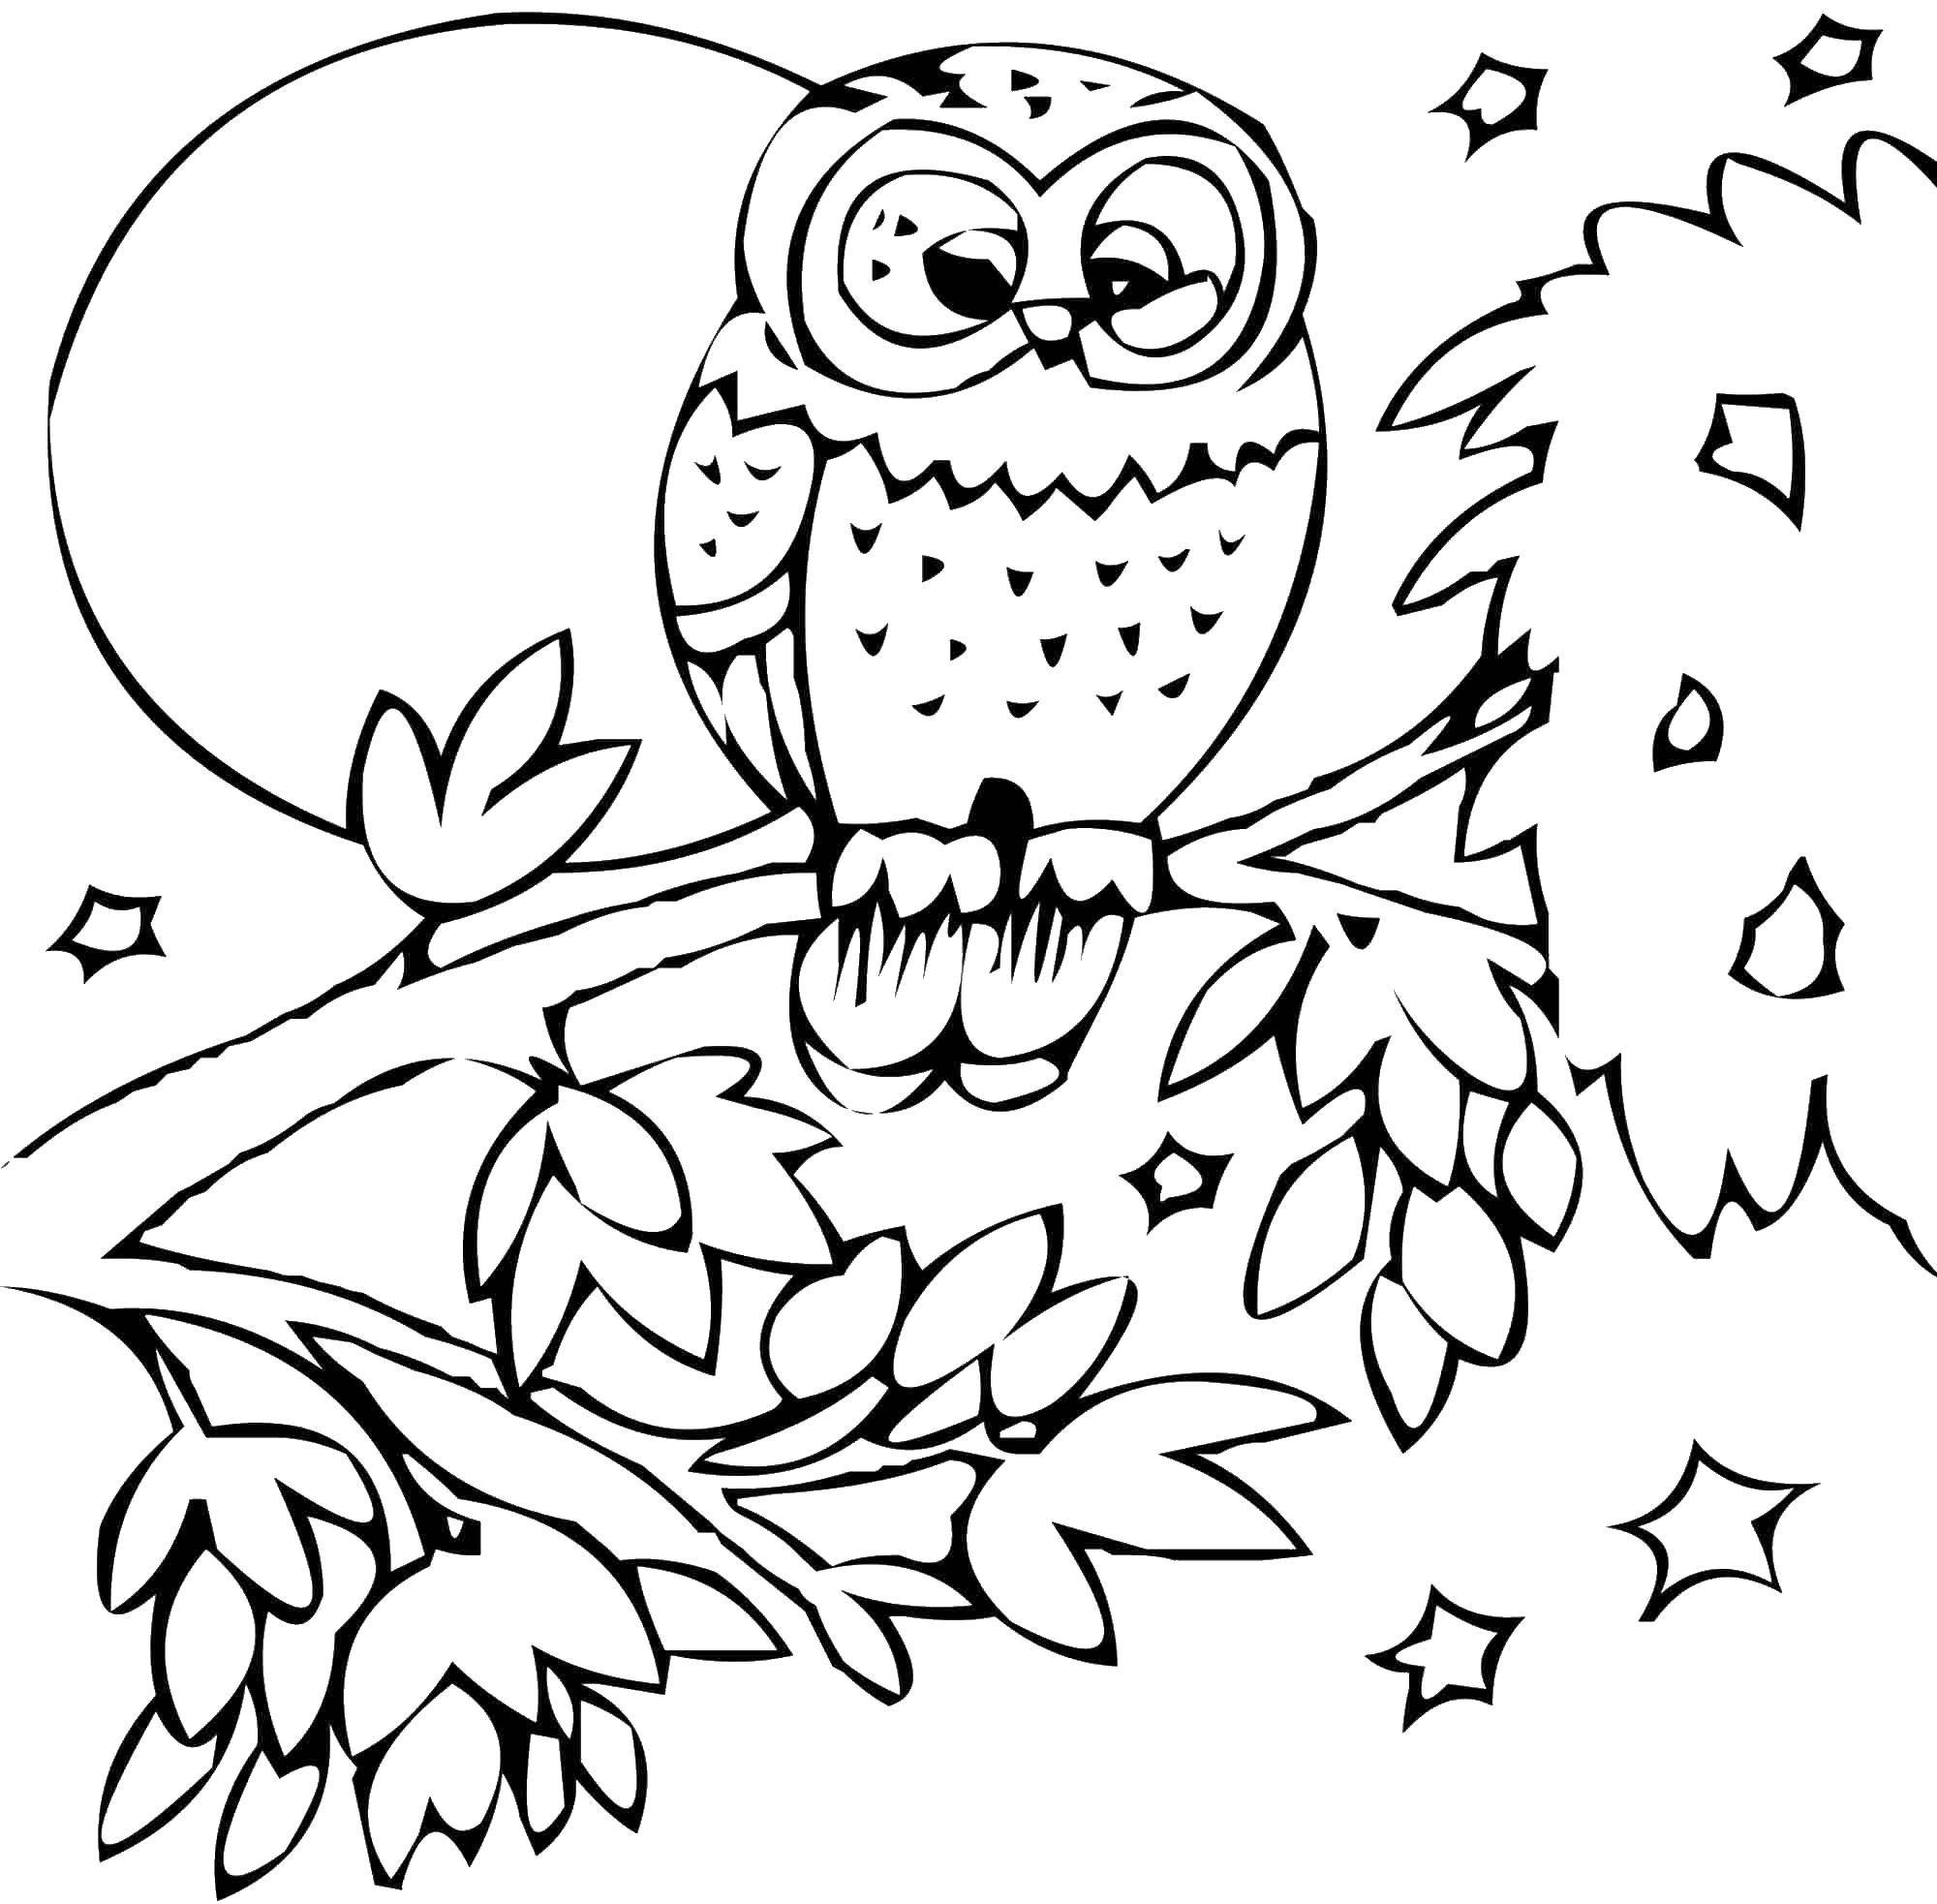 Coloring Owl sitting on branch night. Category birds. Tags:  the owl, sitting, branch.